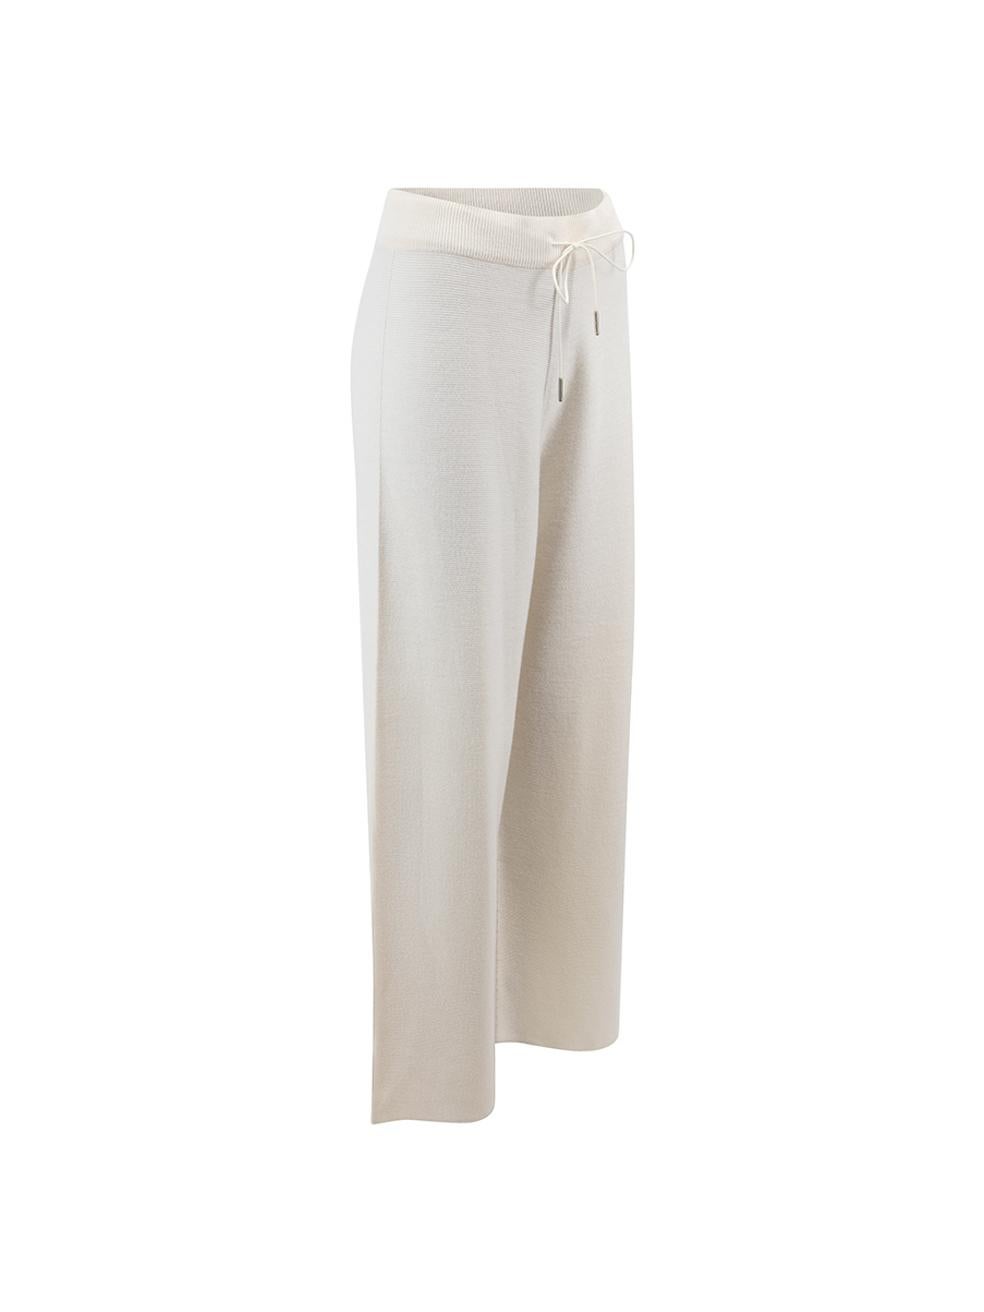 CONDITION is Very good. Hardly any visible wear to shirt is evident on this used Fabiana Filippi designer resale item.



Details


Cream

Wool

Wide leg trousers

Knitted

High rise

Cropped length

Stretchy and elasticated on waistband

Drawstring